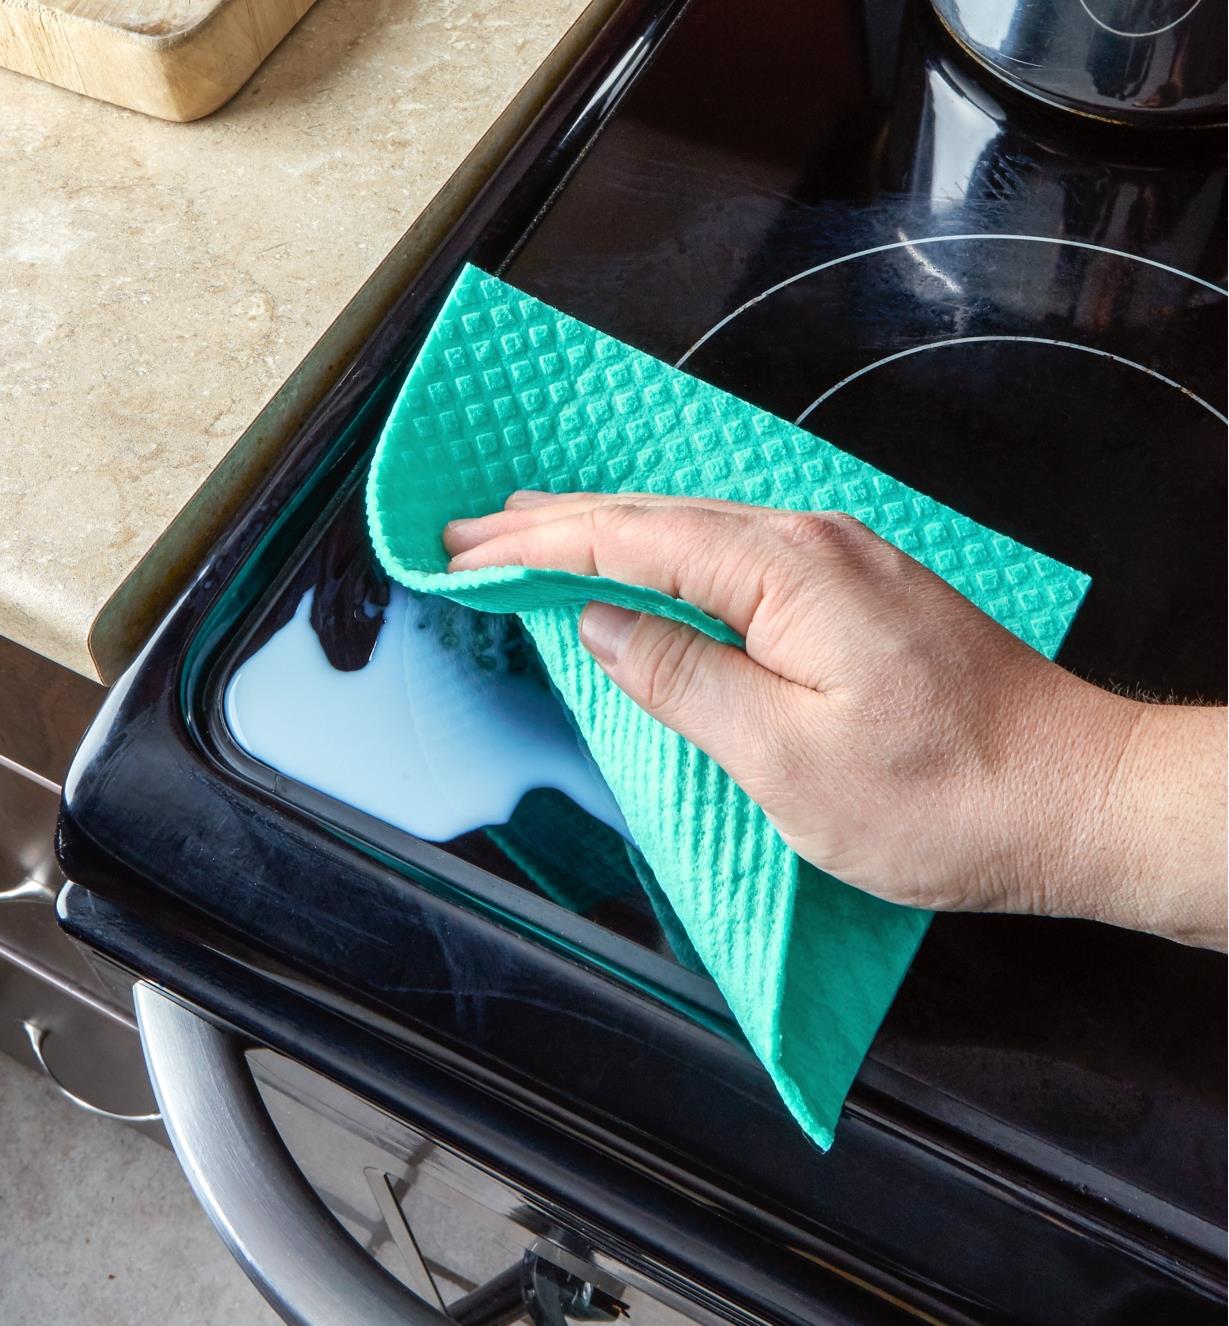 Wiping up a liquid spill on a stovetop using a reusable household paper towel